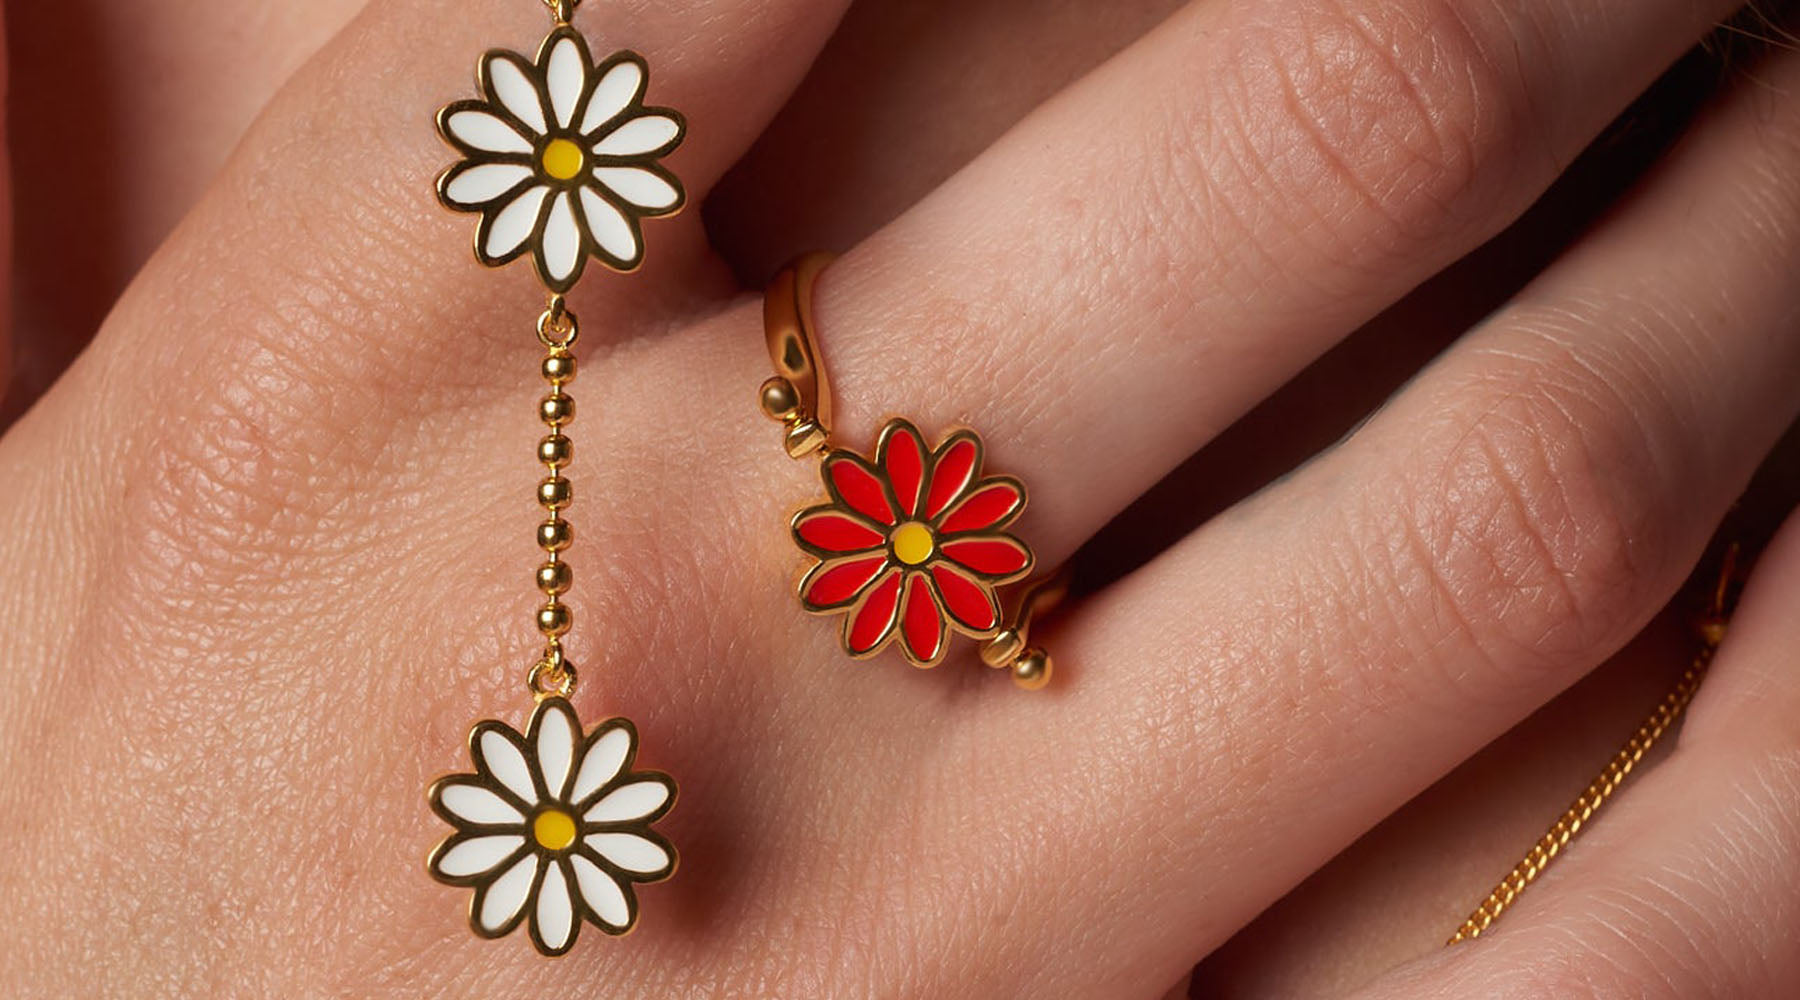 Flower Power: 3 Ways To Let Your Accessories Bloom